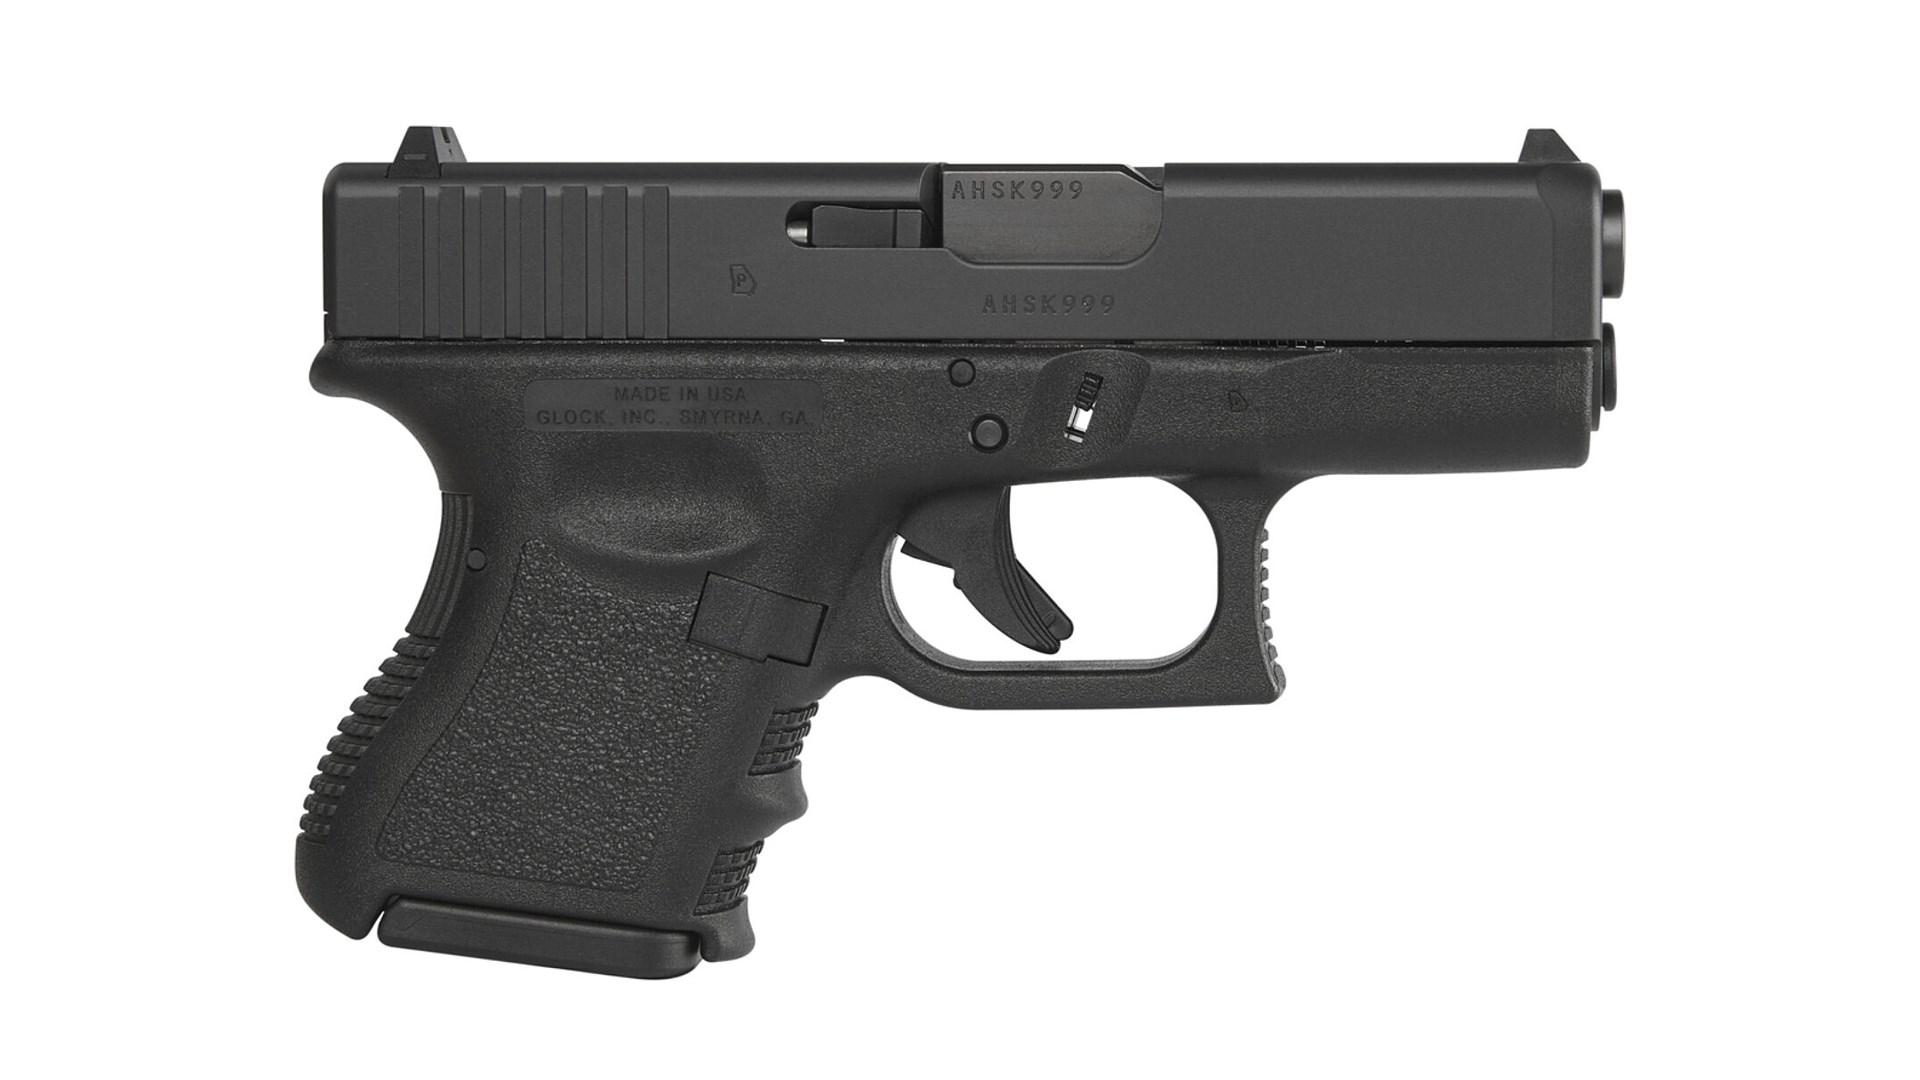 Right side of the Glock 28 shown on white.